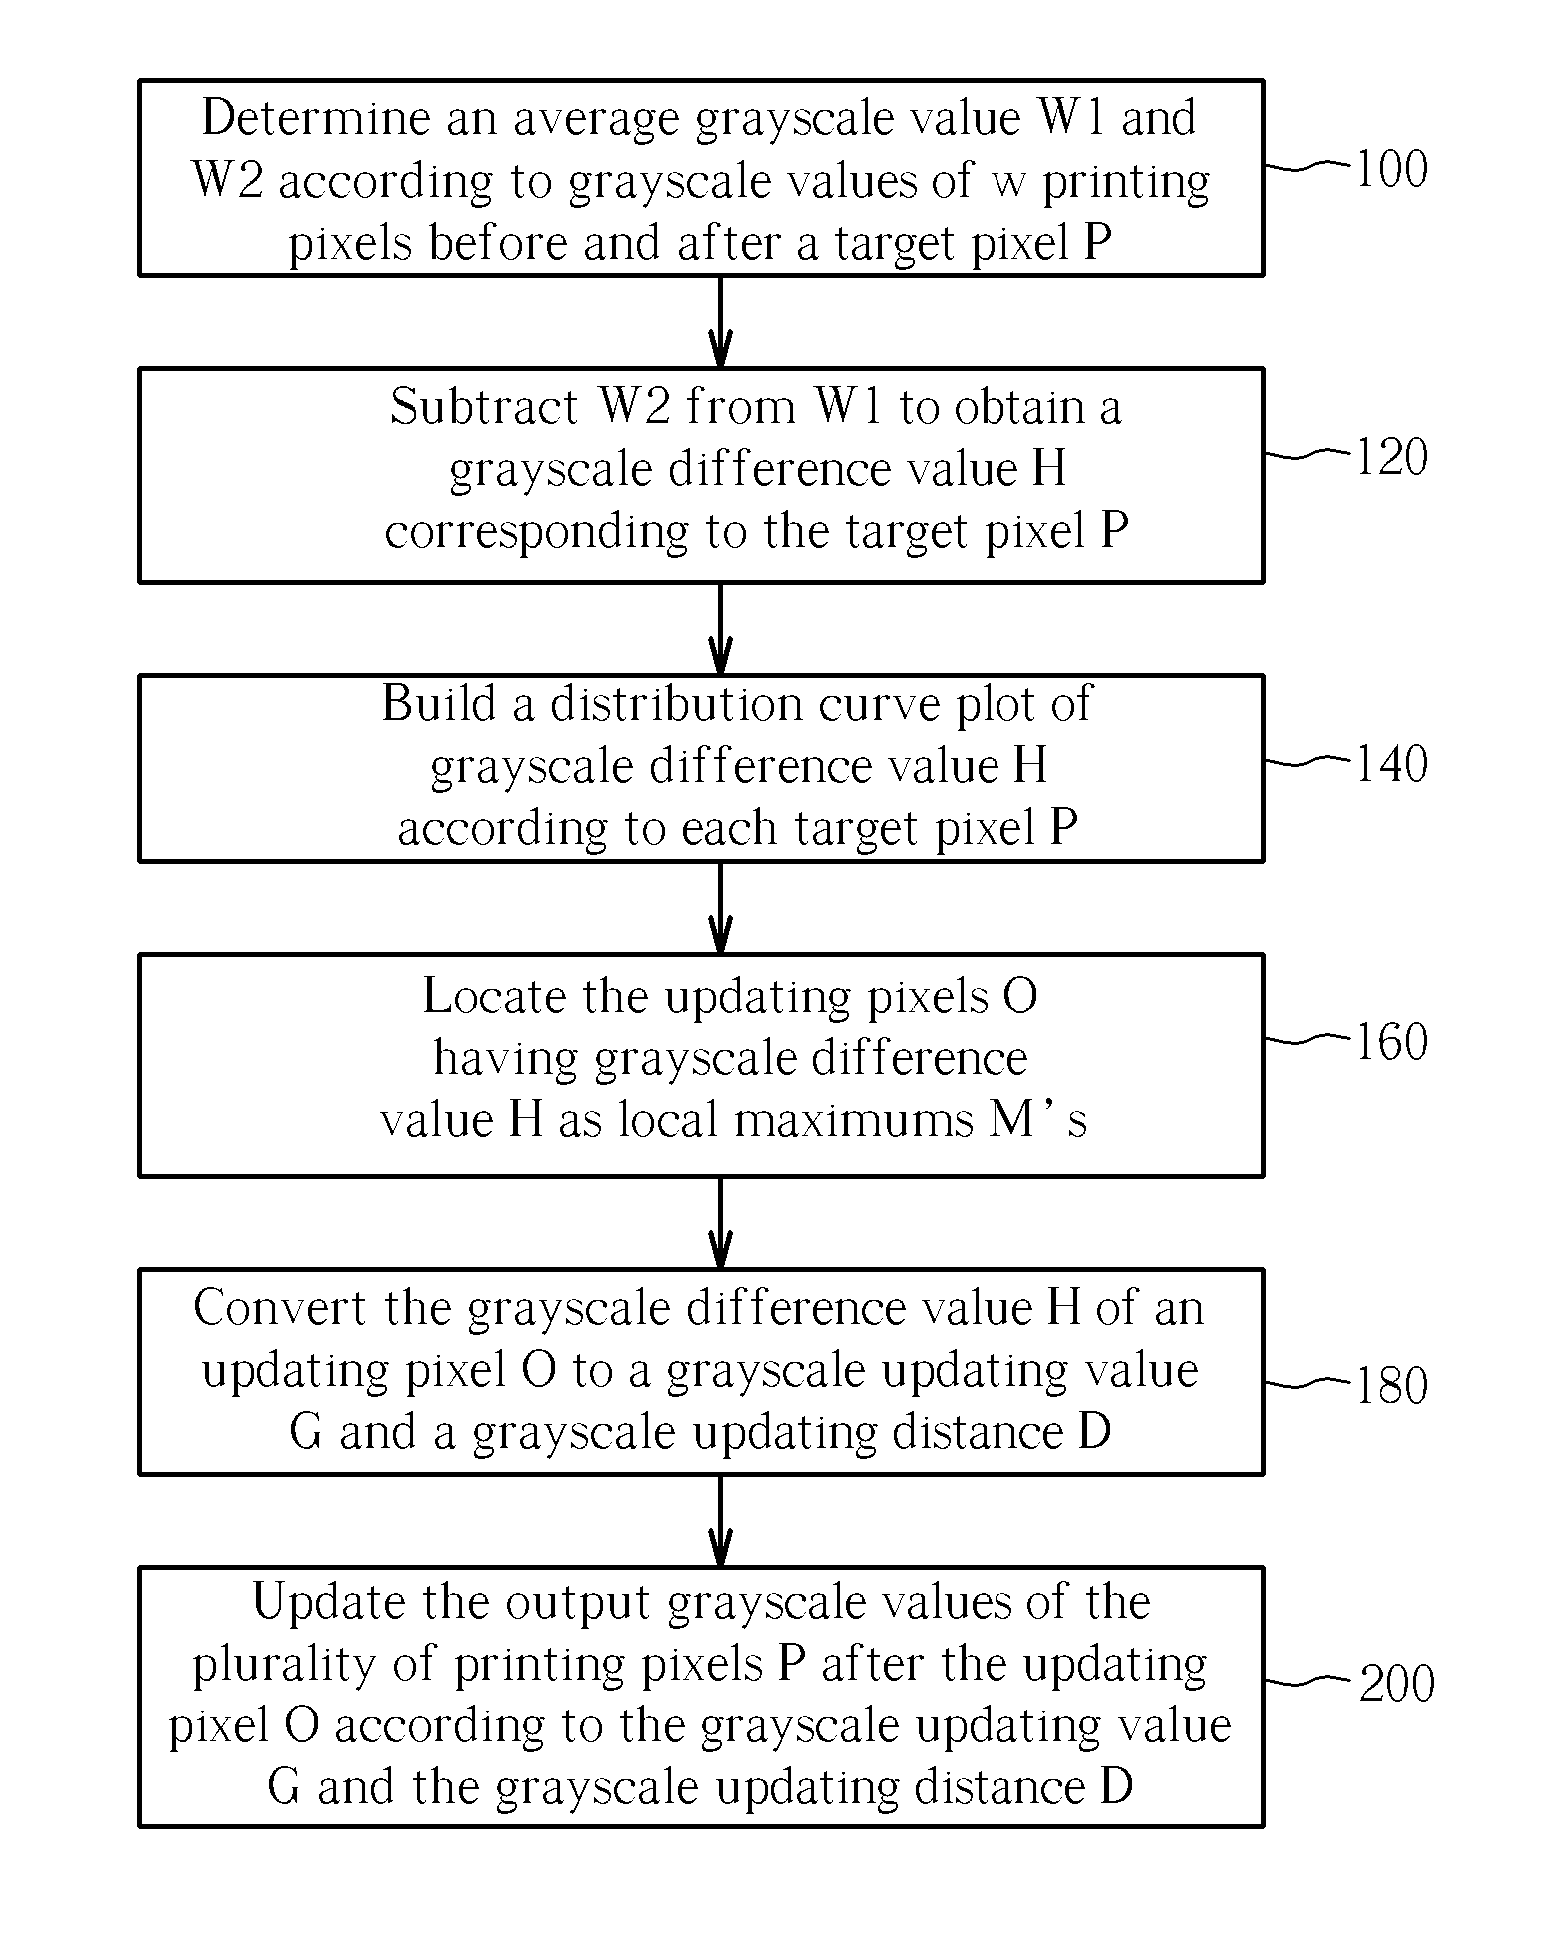 Method of image processing for heat accumulation of a thermal printer